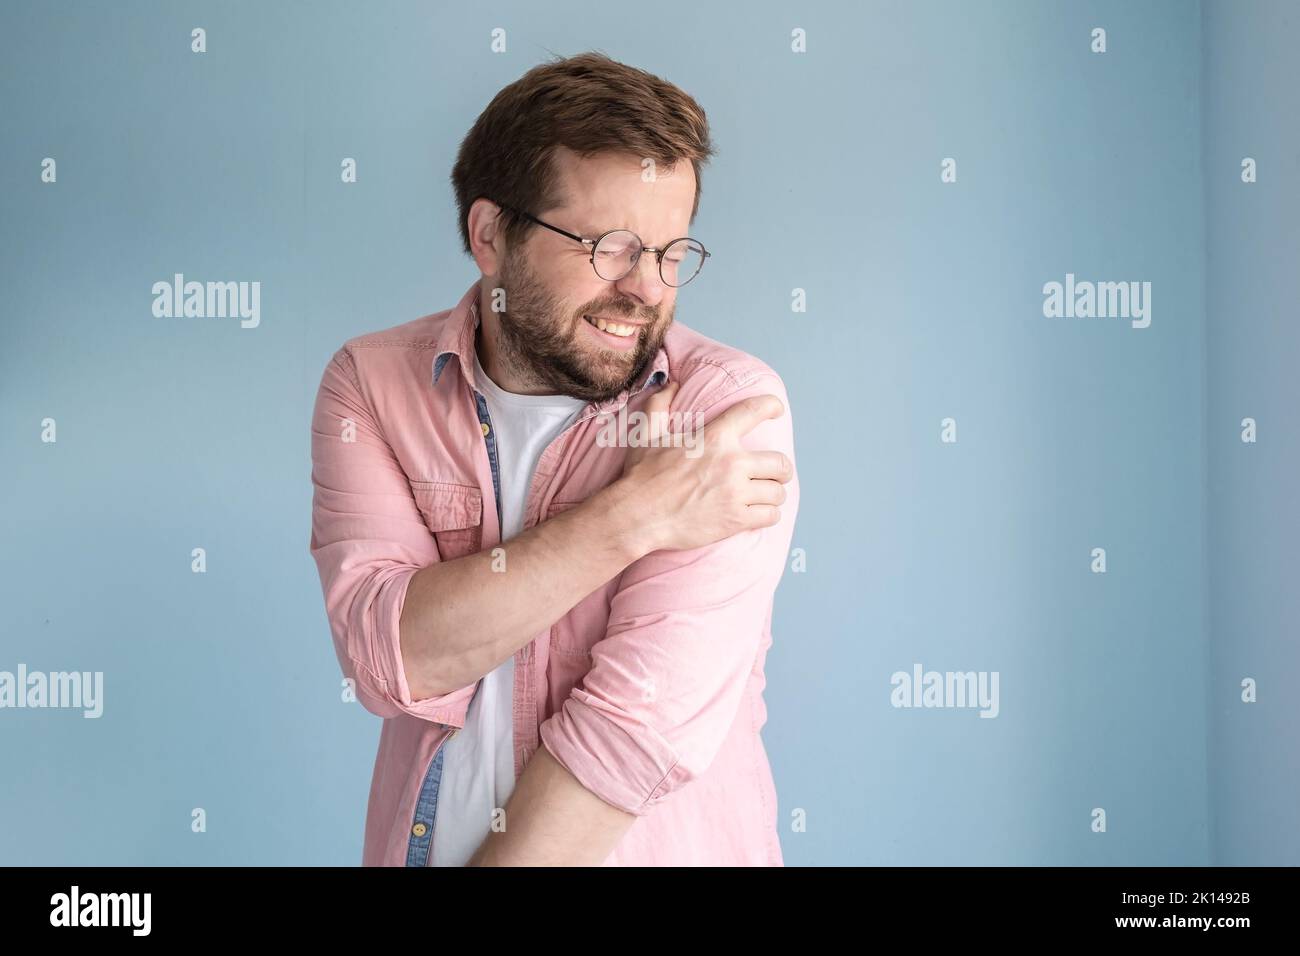 Man is experiencing severe pain in shoulder, he is suffering, made a painful grimace and put hand on the sore spot. Medical concept.  Stock Photo